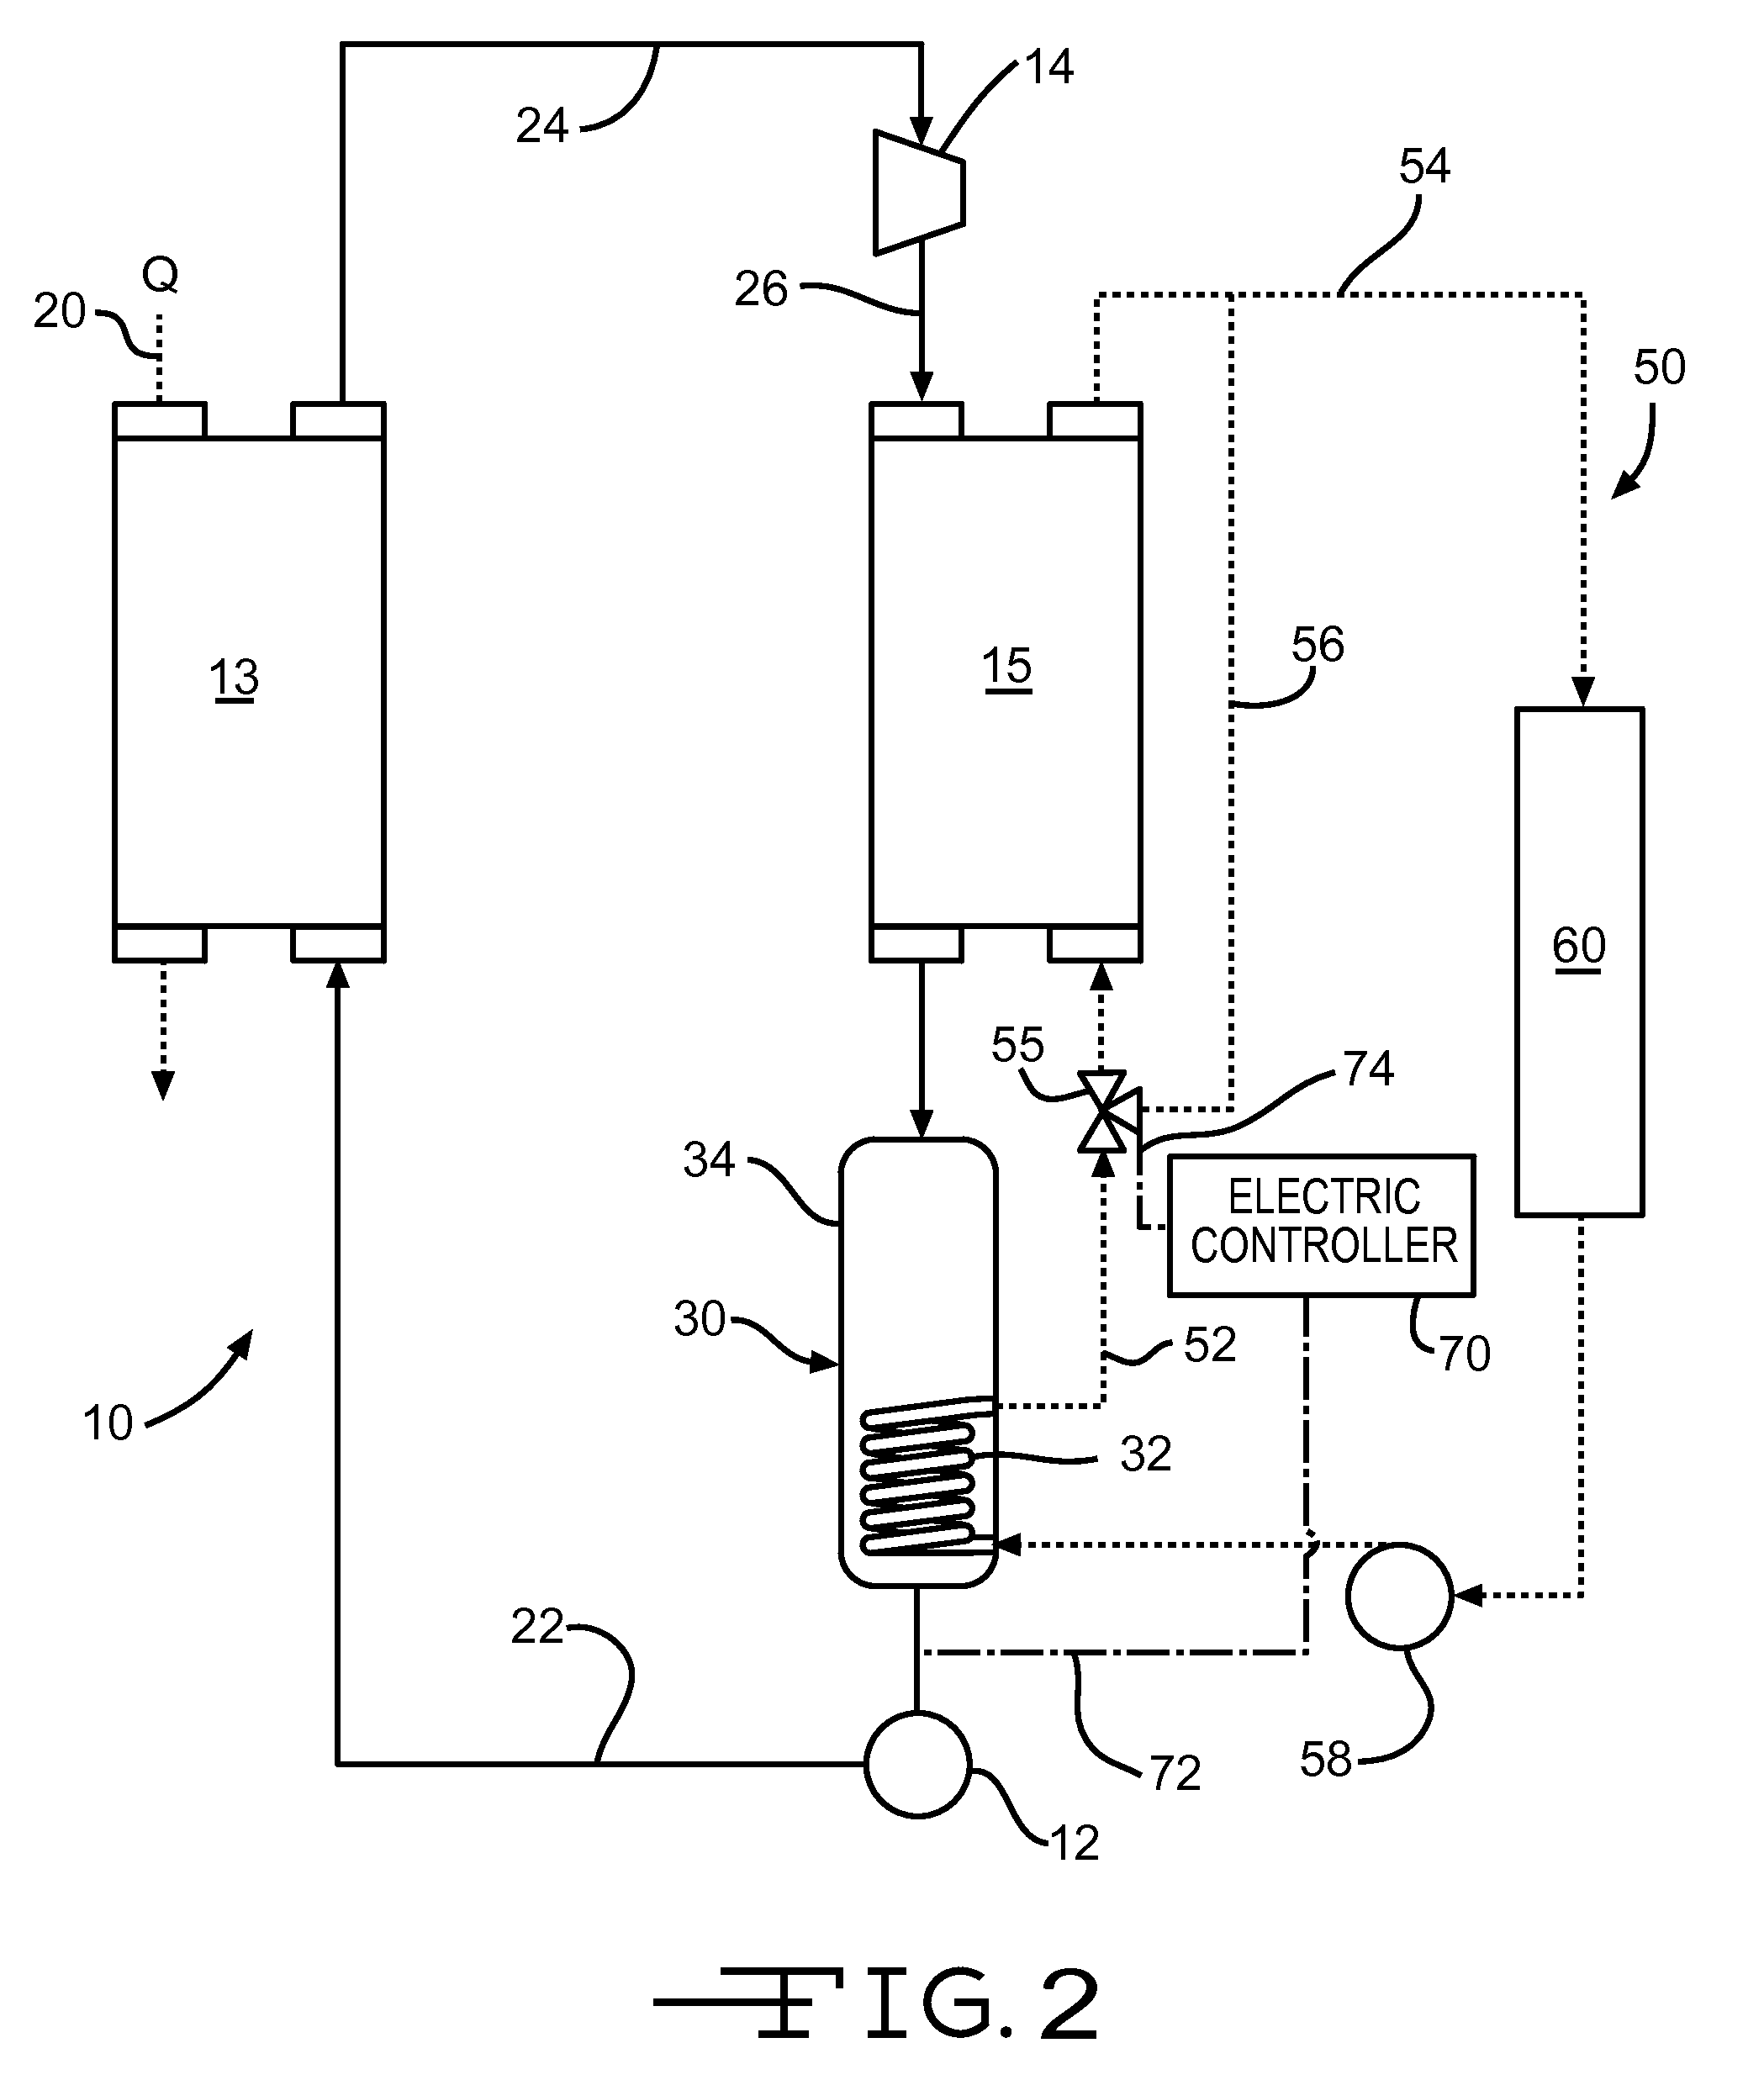 Energy recovery system and method using an organic rankine cycle with condenser pressure regulation